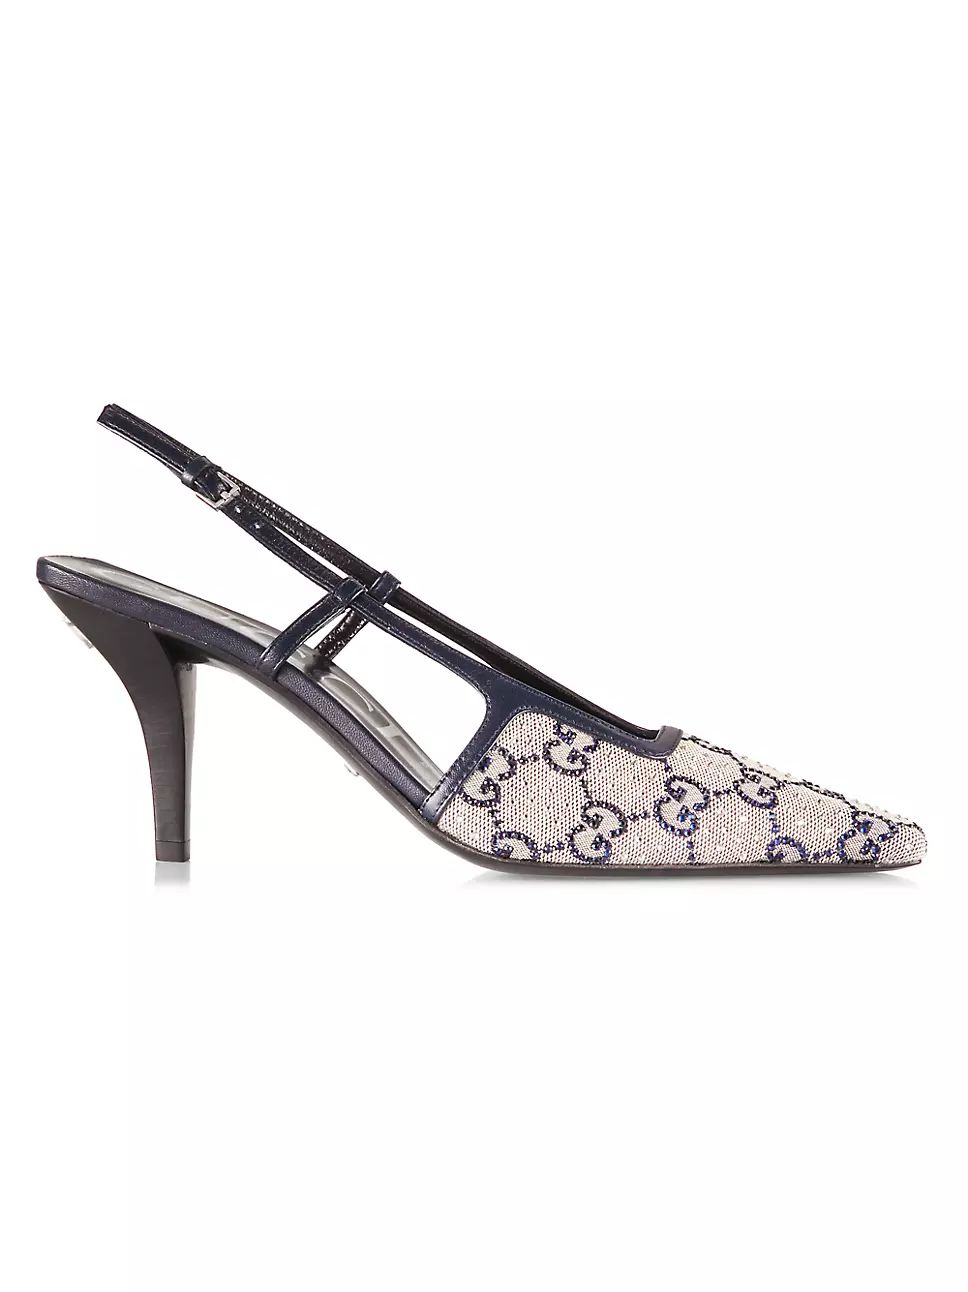 Tom All Over Gucci Slingback High-Heel Mules | Saks Fifth Avenue